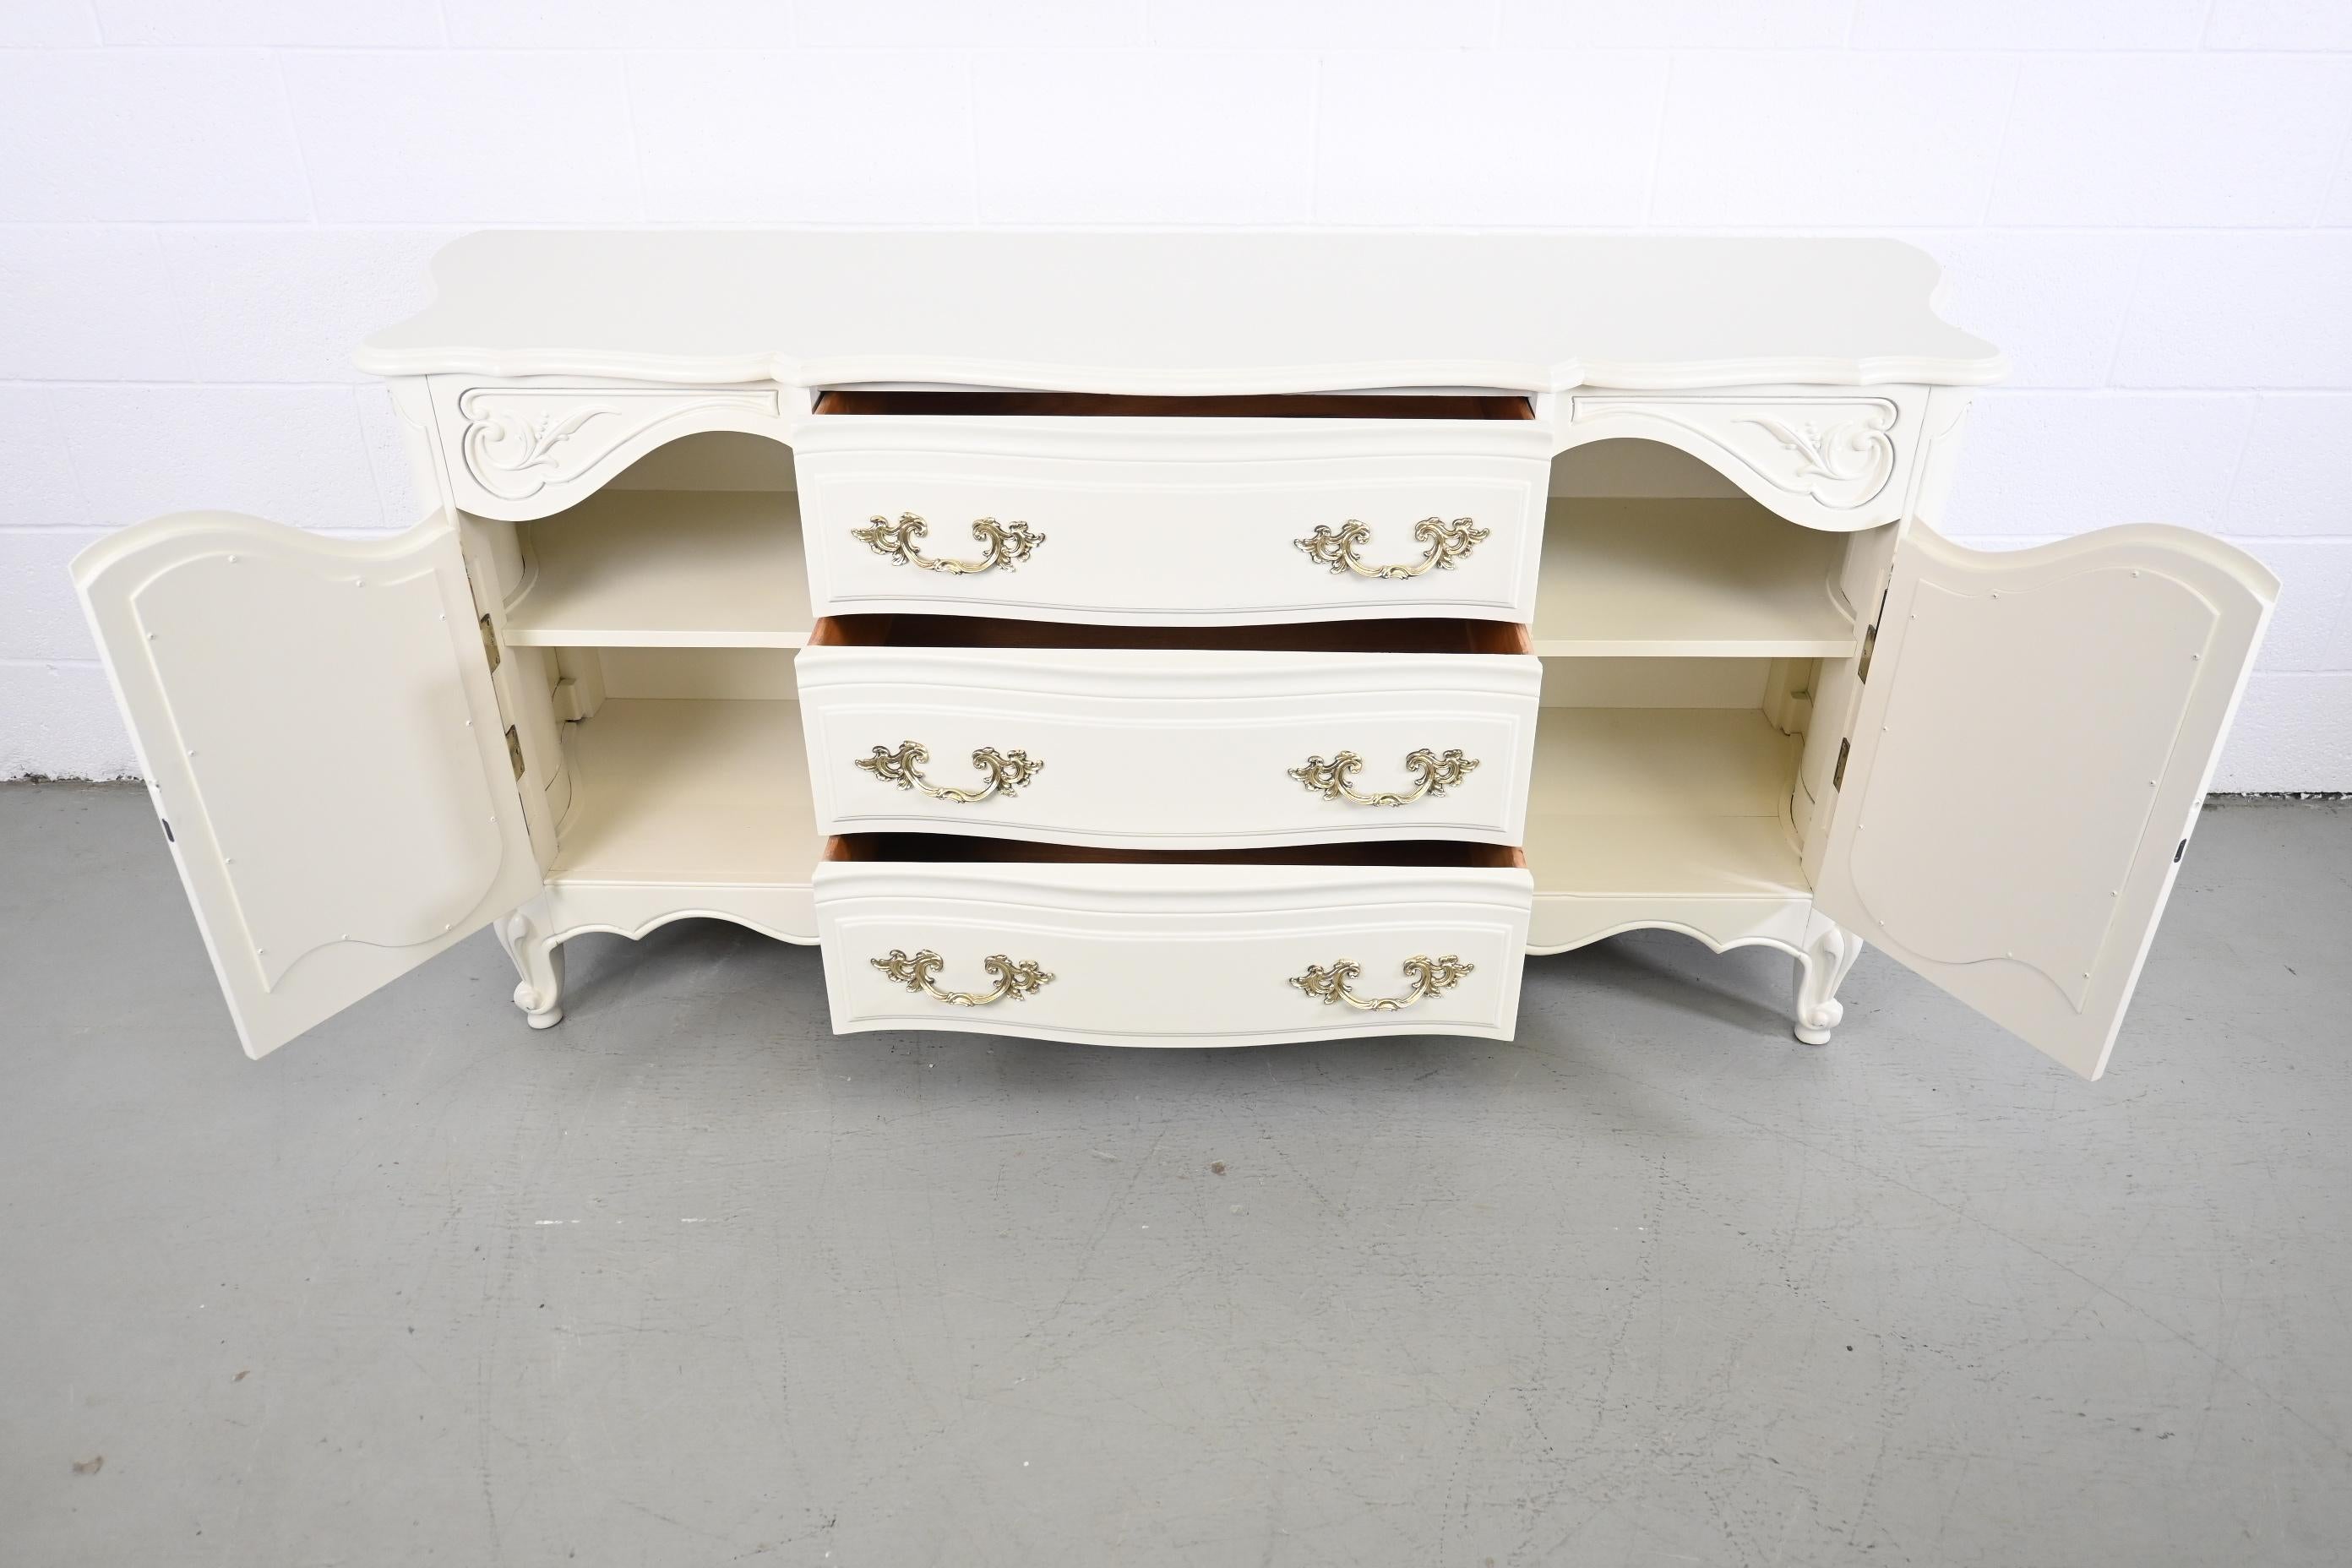 Karges Furniture Louis XV French Provincial Credenza or Sideboard For Sale 6